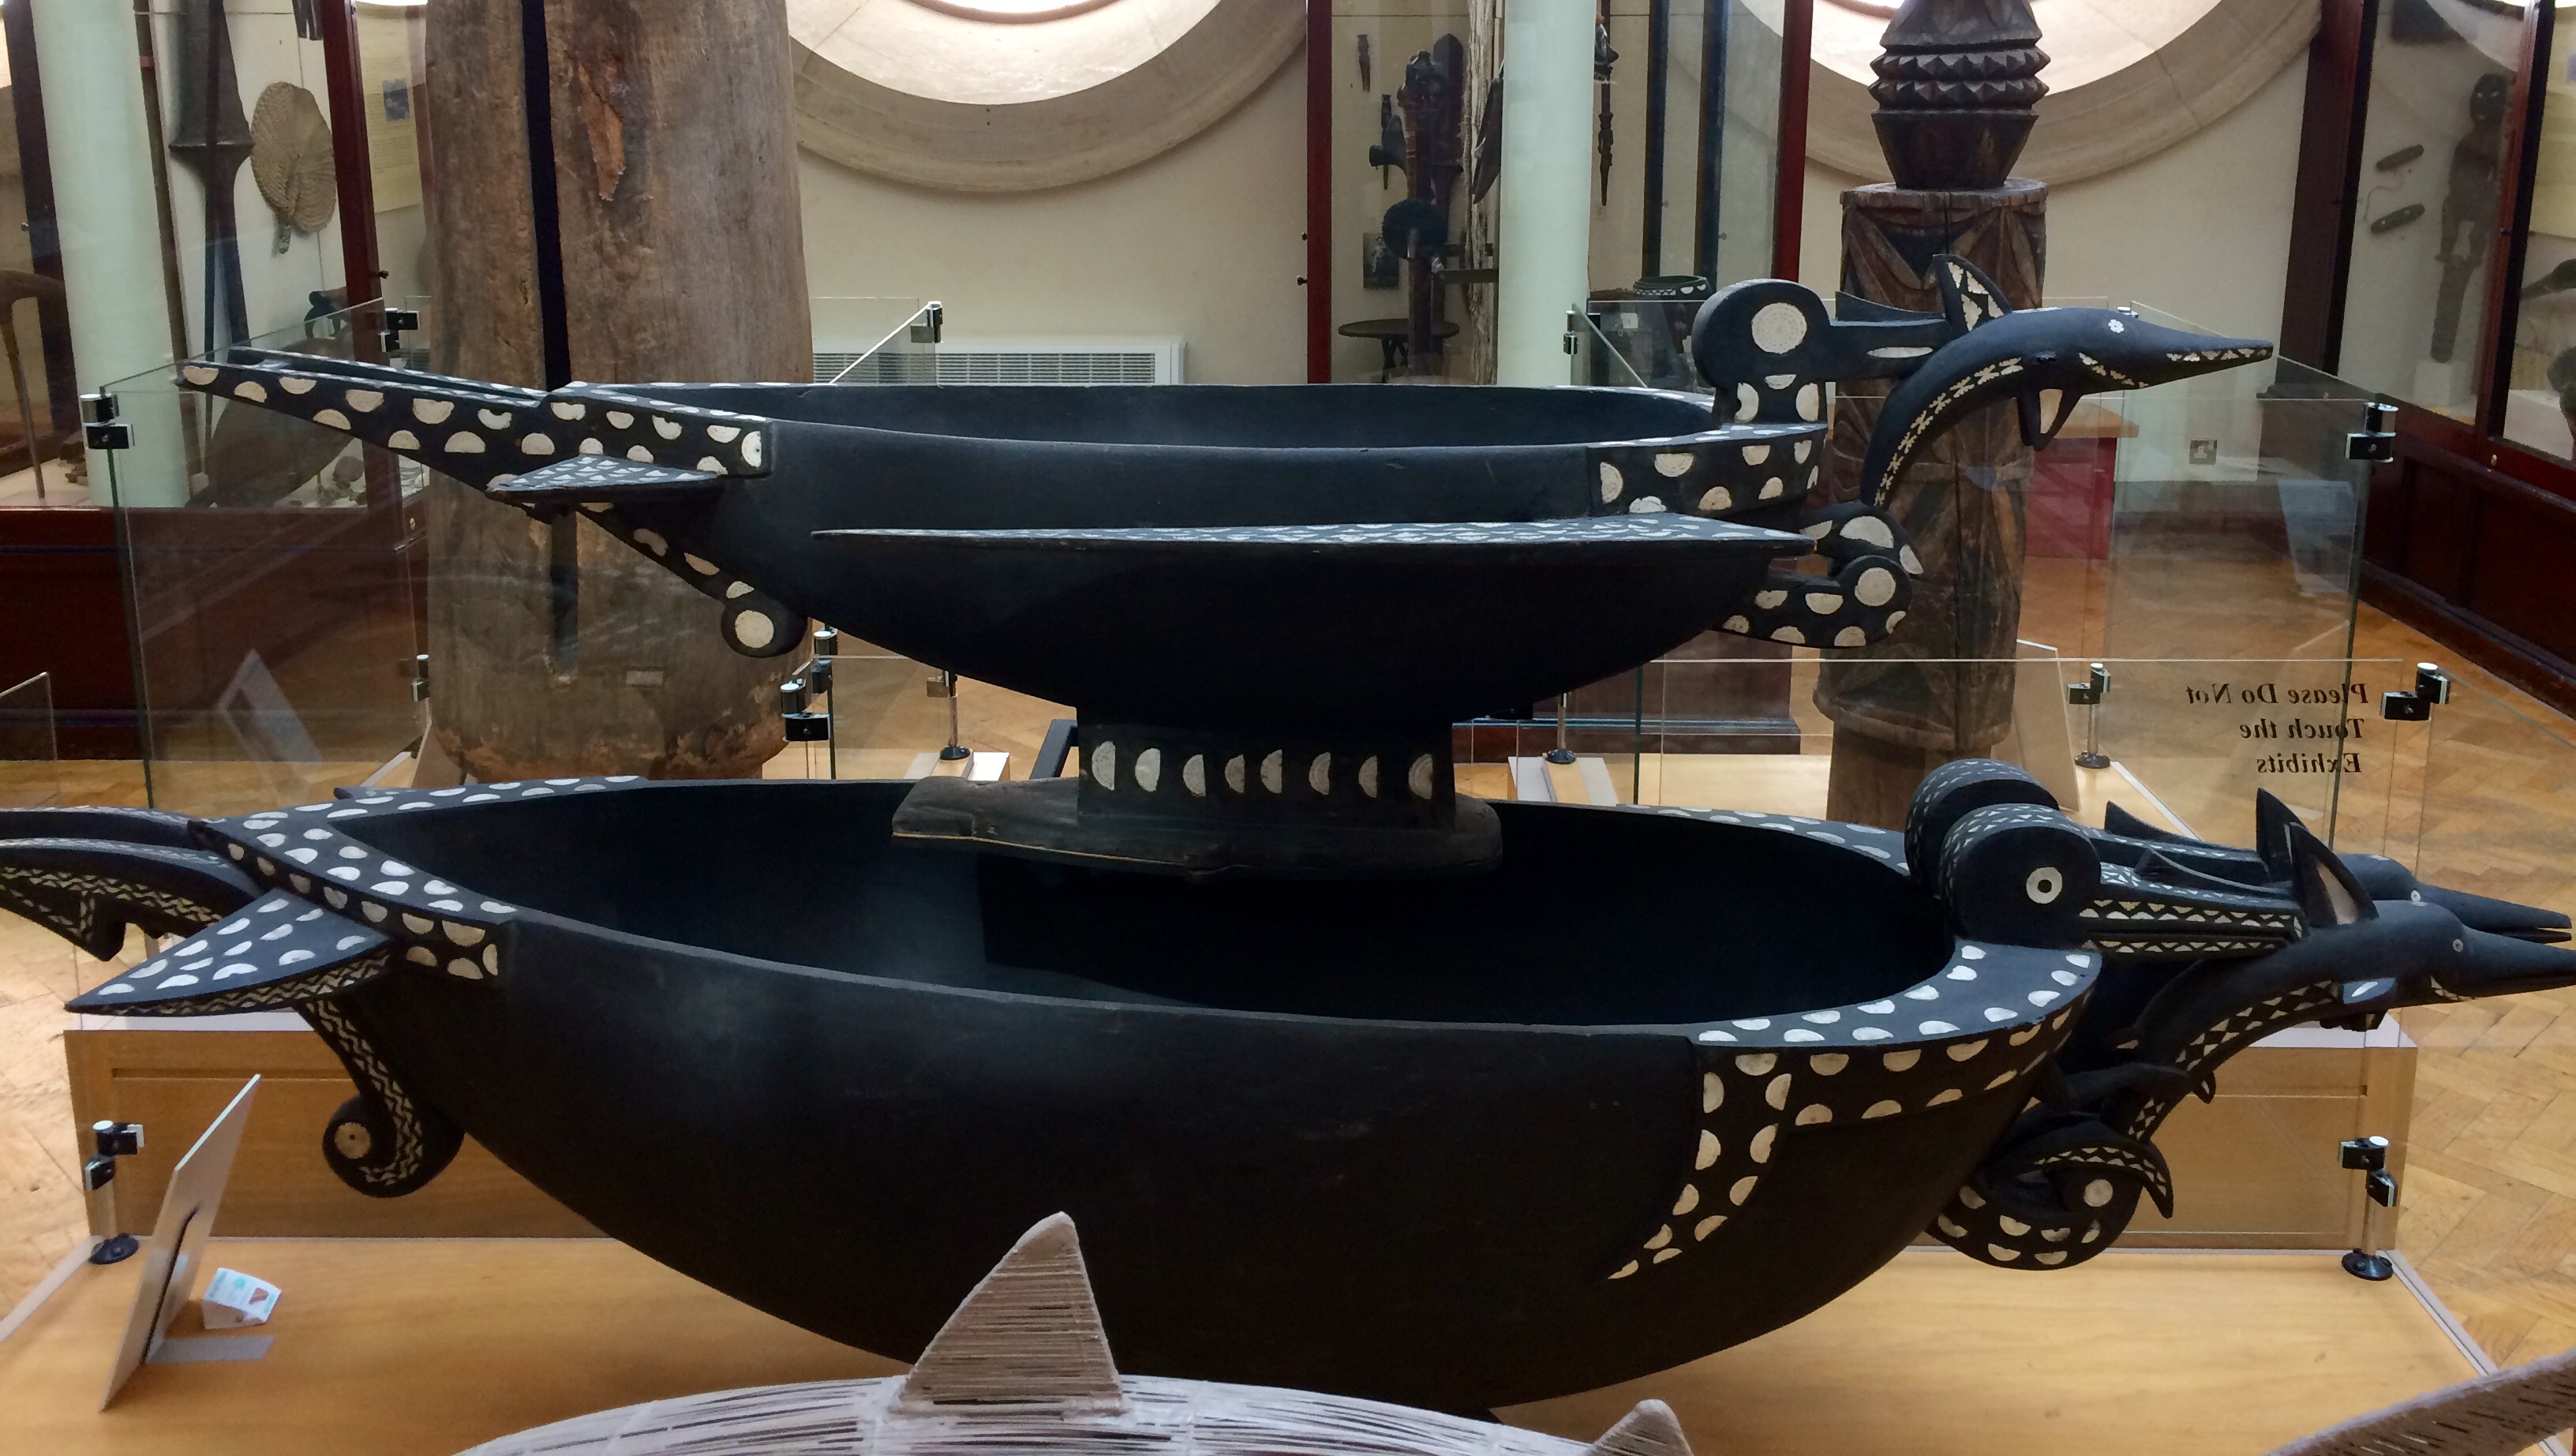 Food bowls from the Solomon Islands shown on display